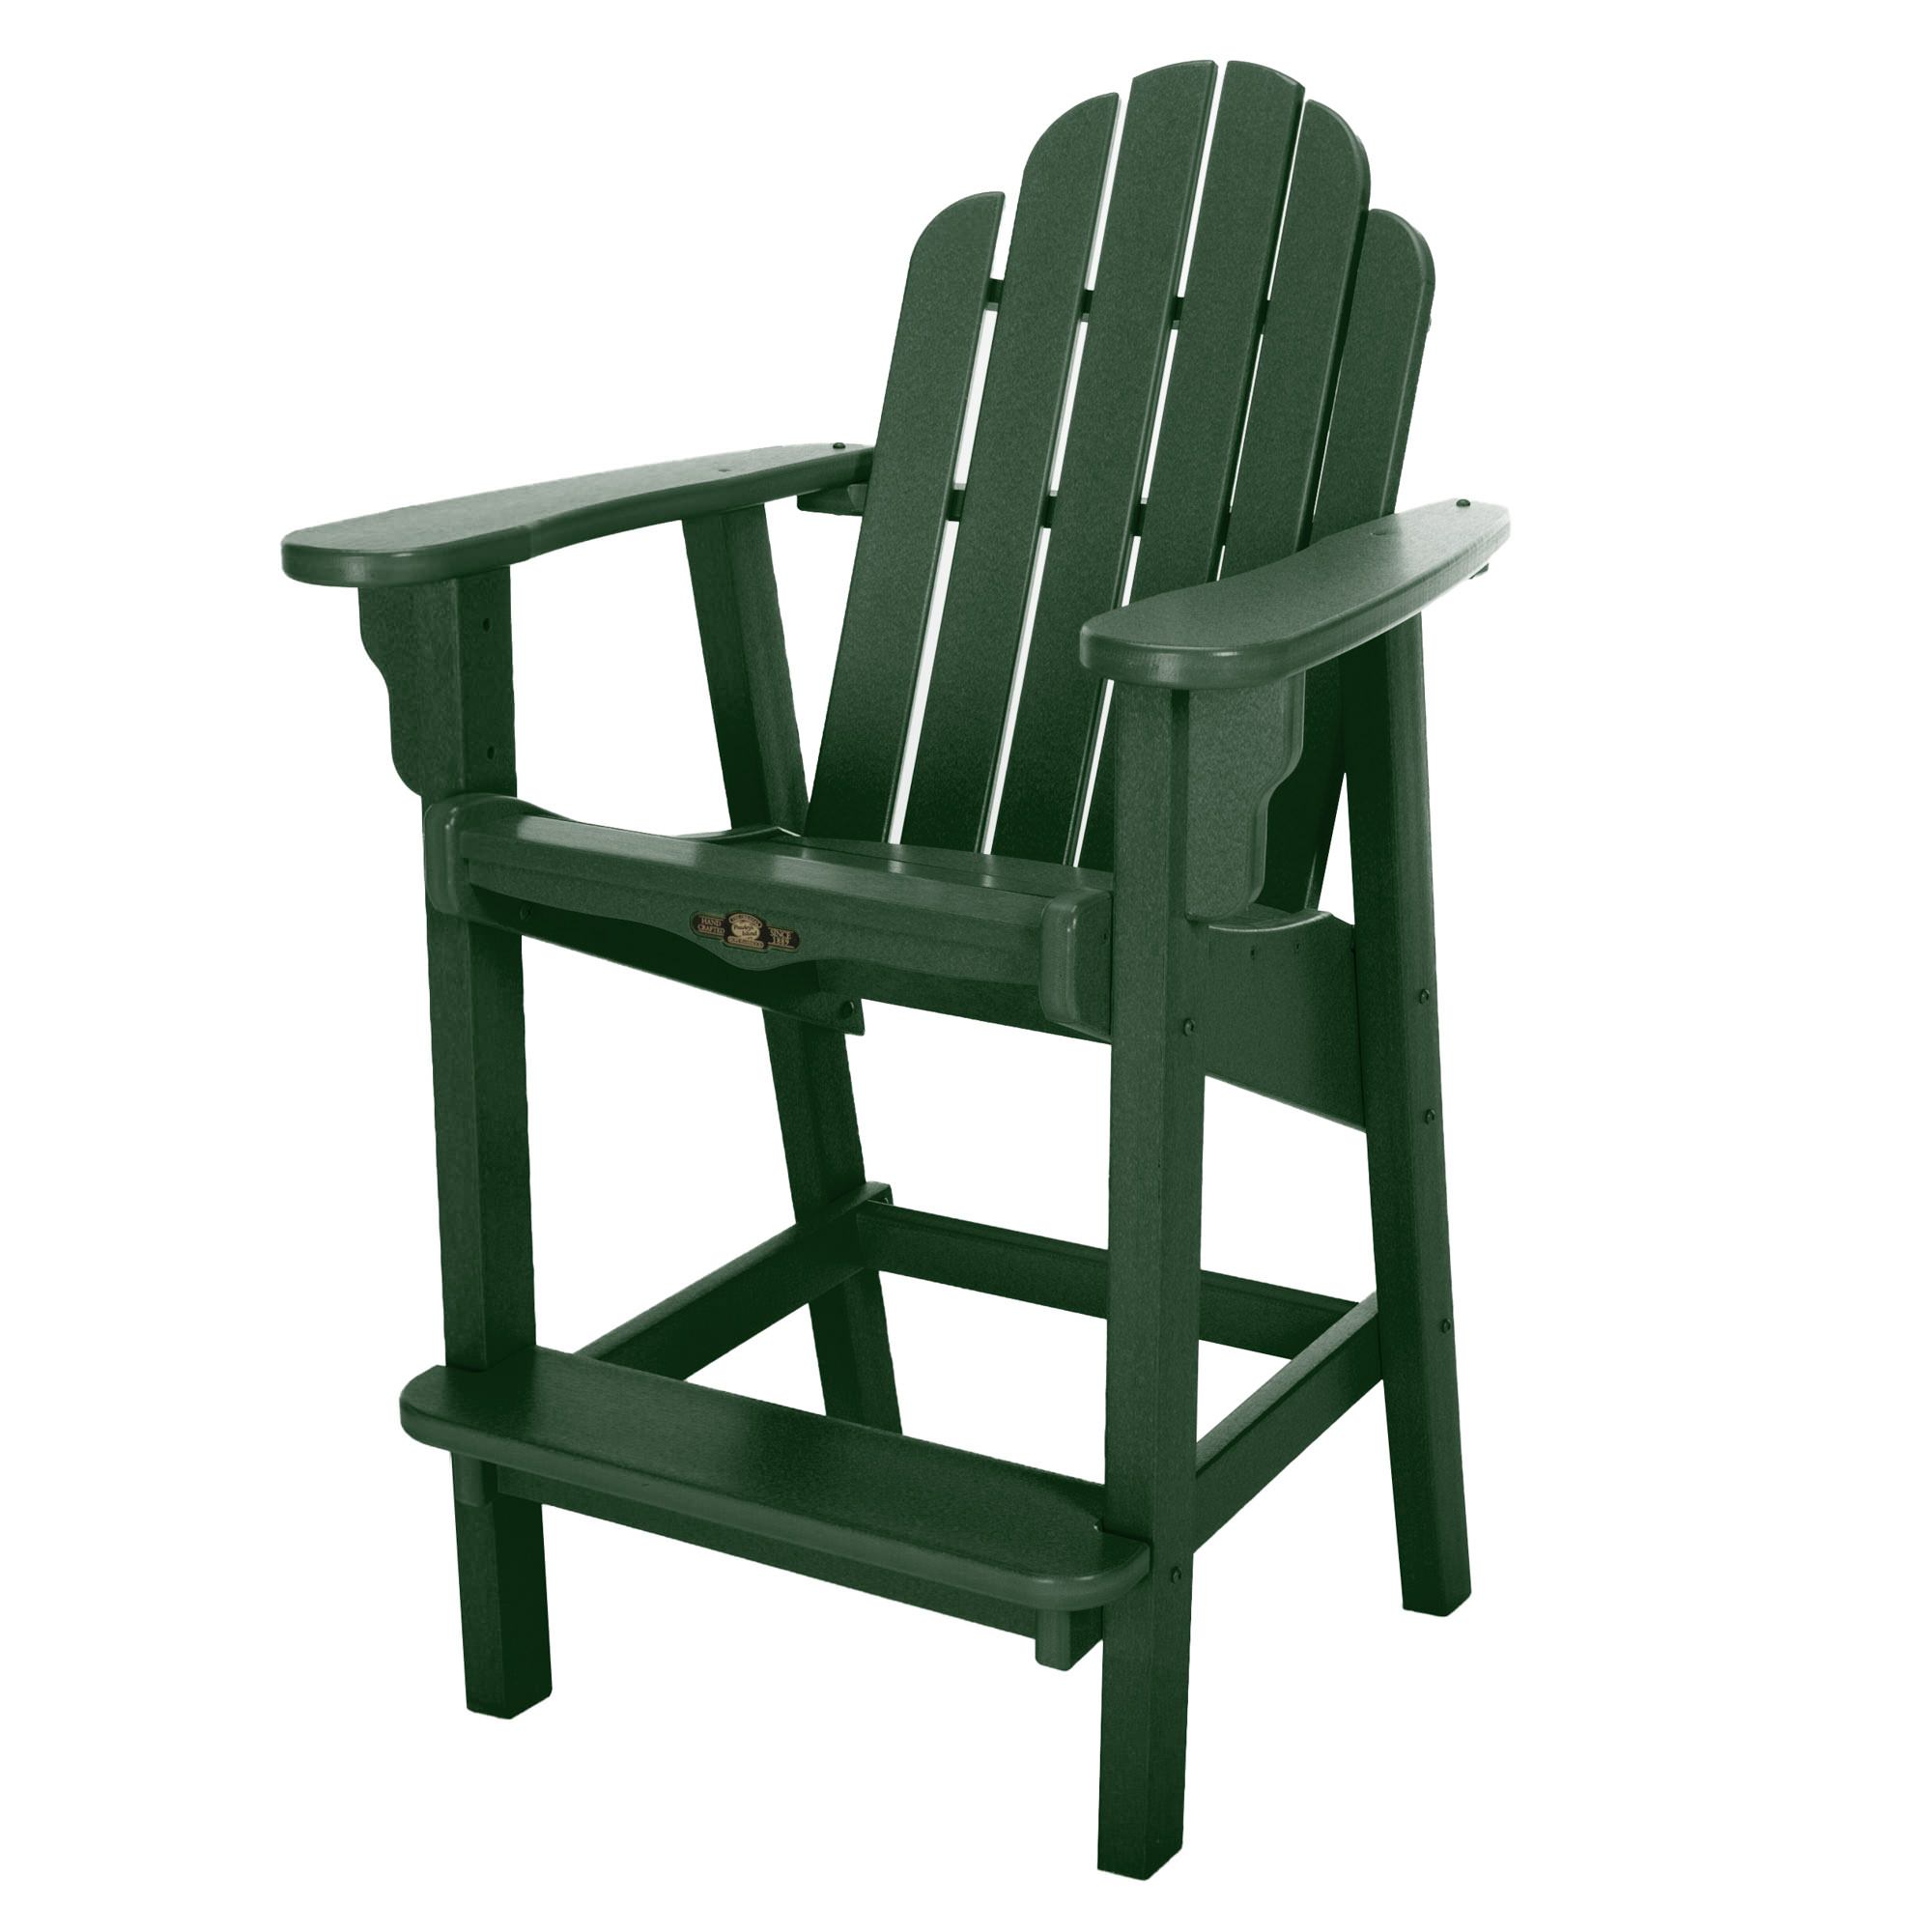 Durawood Essentials Counter Height Chair Pawleys Island